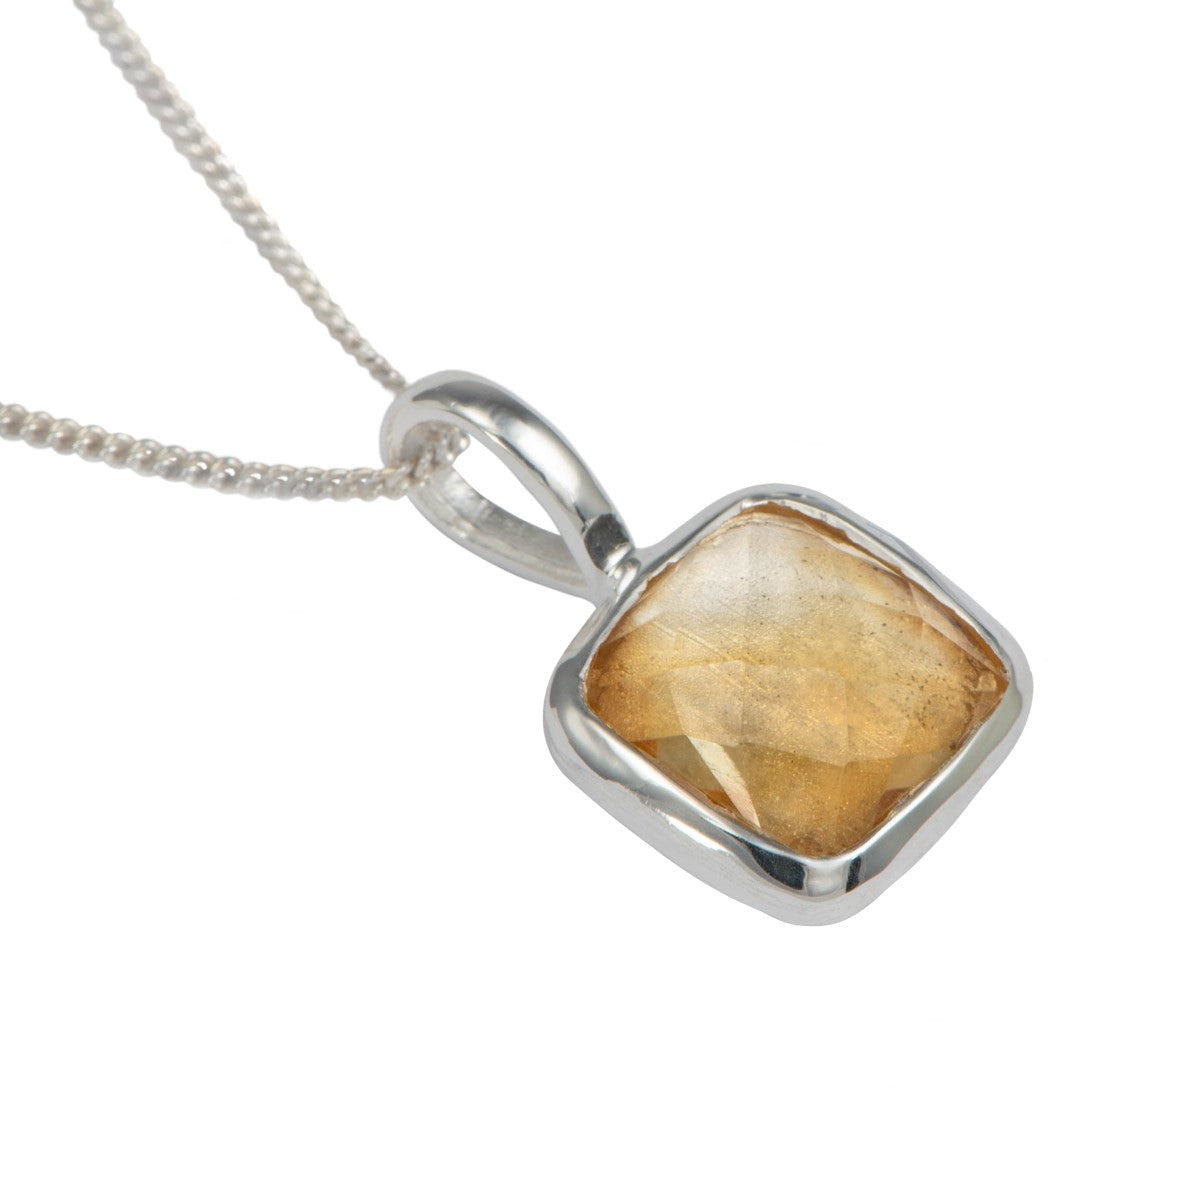 Sterling Silver Pendant Necklace with a Faceted Square Gemstone - Citrine